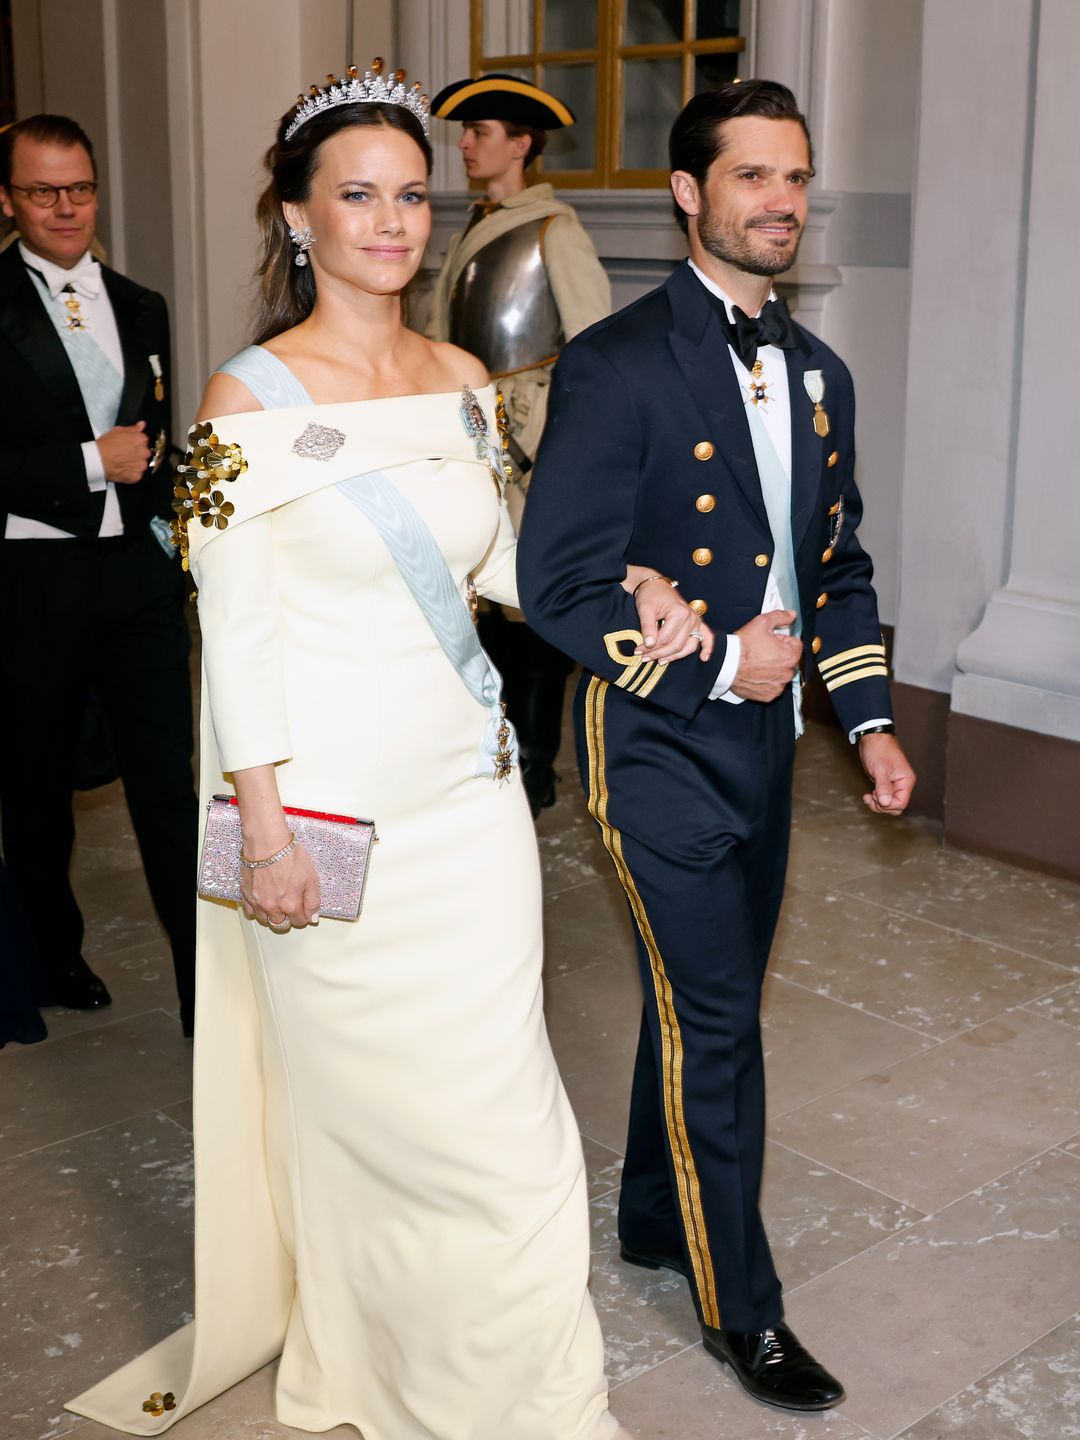 Princess Sofia of Sweden and Prince Carl Phillip of Sweden attend the Jubilee banquet during the celebration of the 50th coronation anniversary of King Carl Gustav. Sofia Wore a white off the shoulder gown